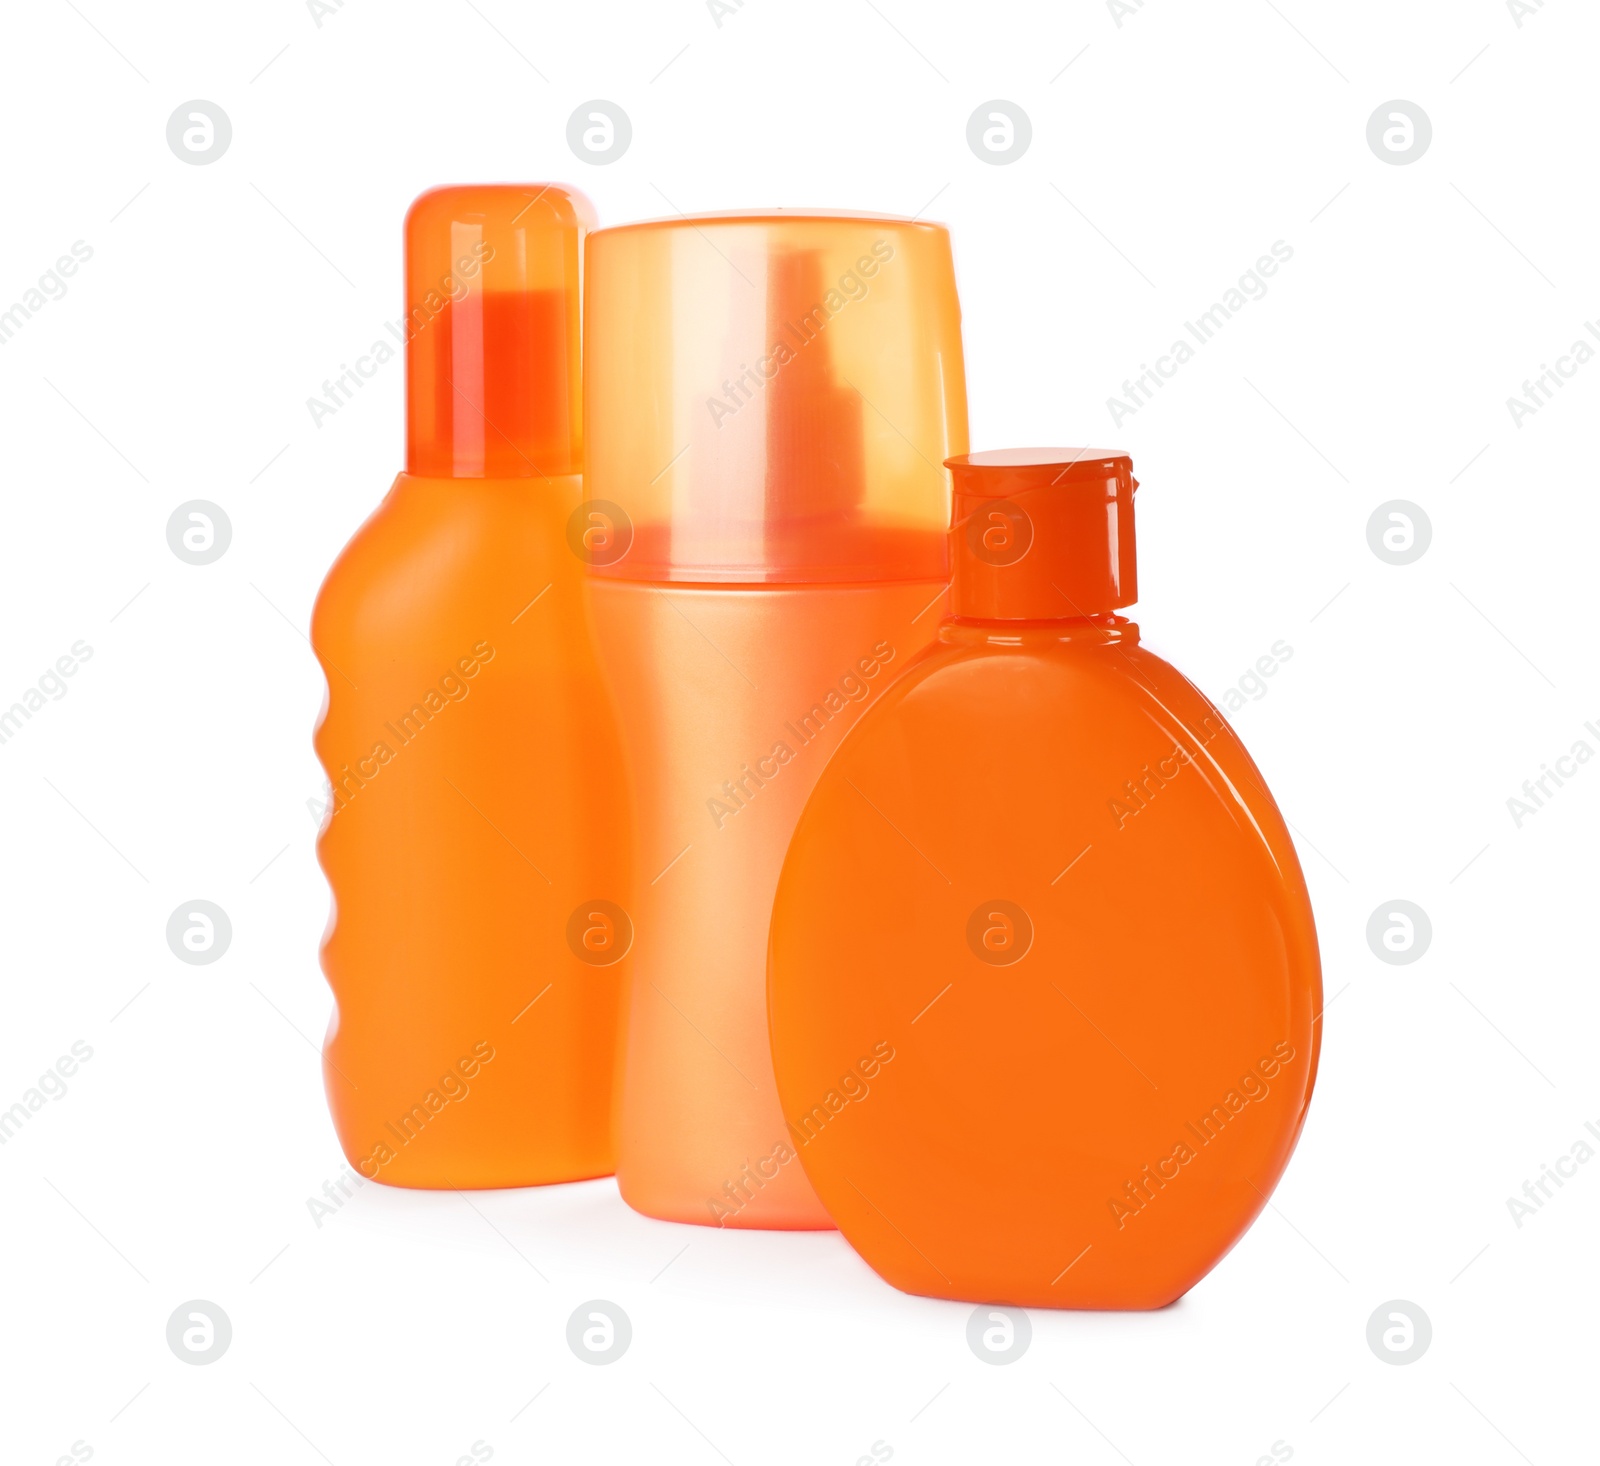 Photo of Bottles with sun protection products isolated on white